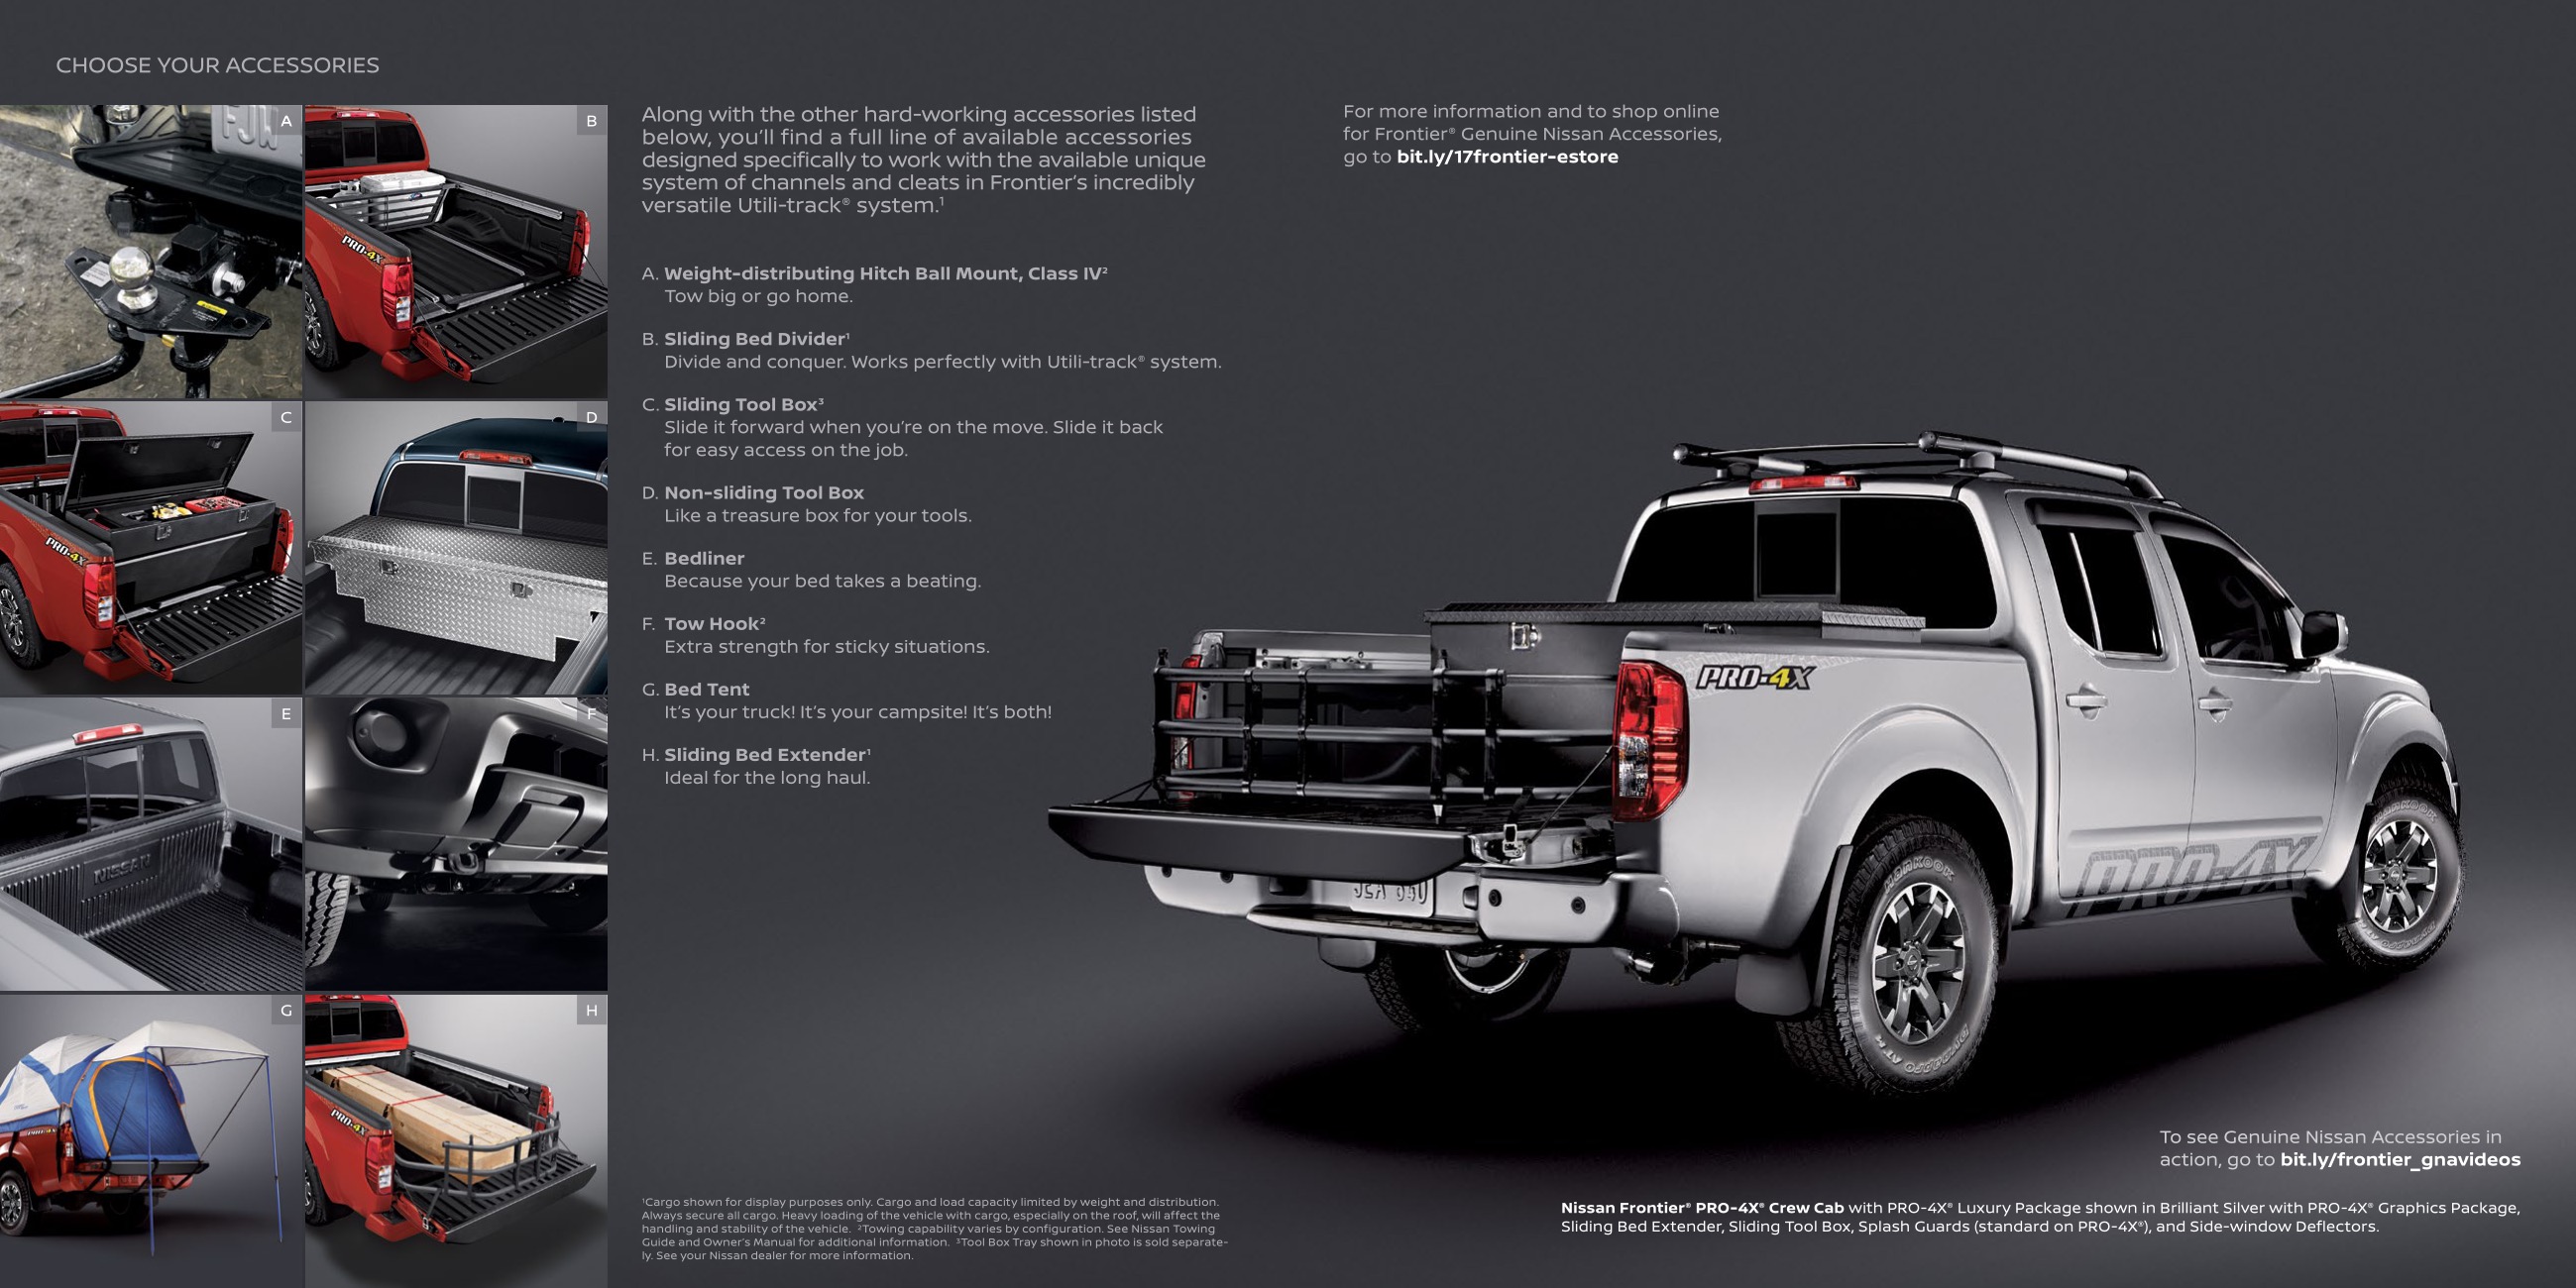 2017 Nissan Frontier Brochure Page 5